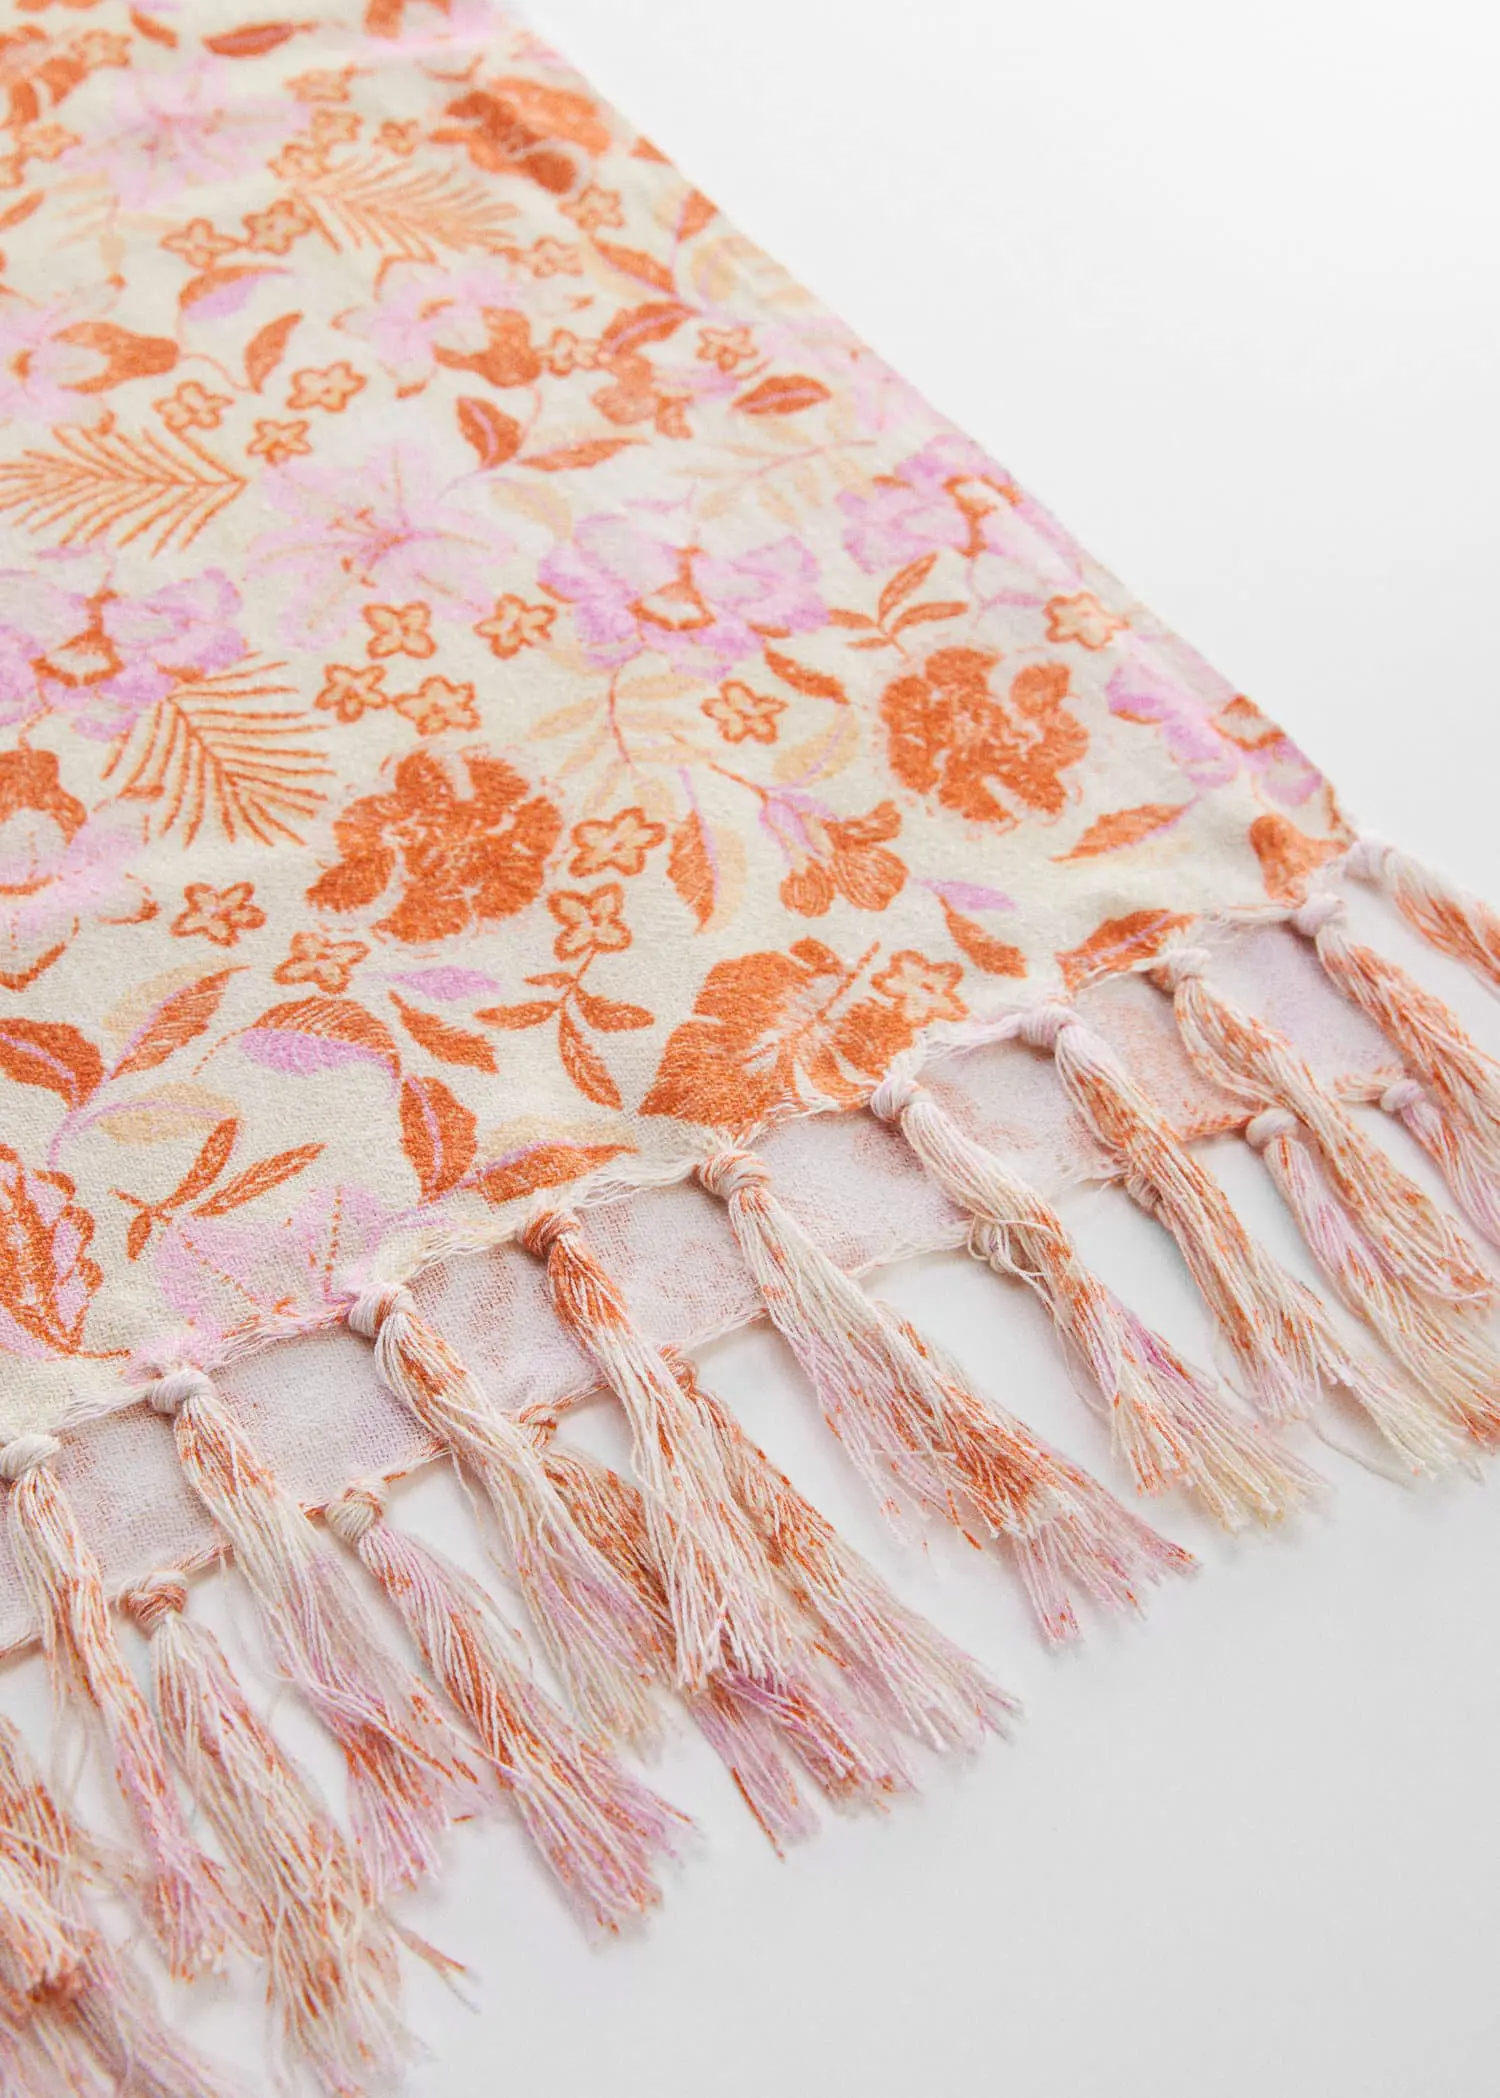 Mango 100% Cotton flower towel. a close-up view of a pink and orange blanket. 